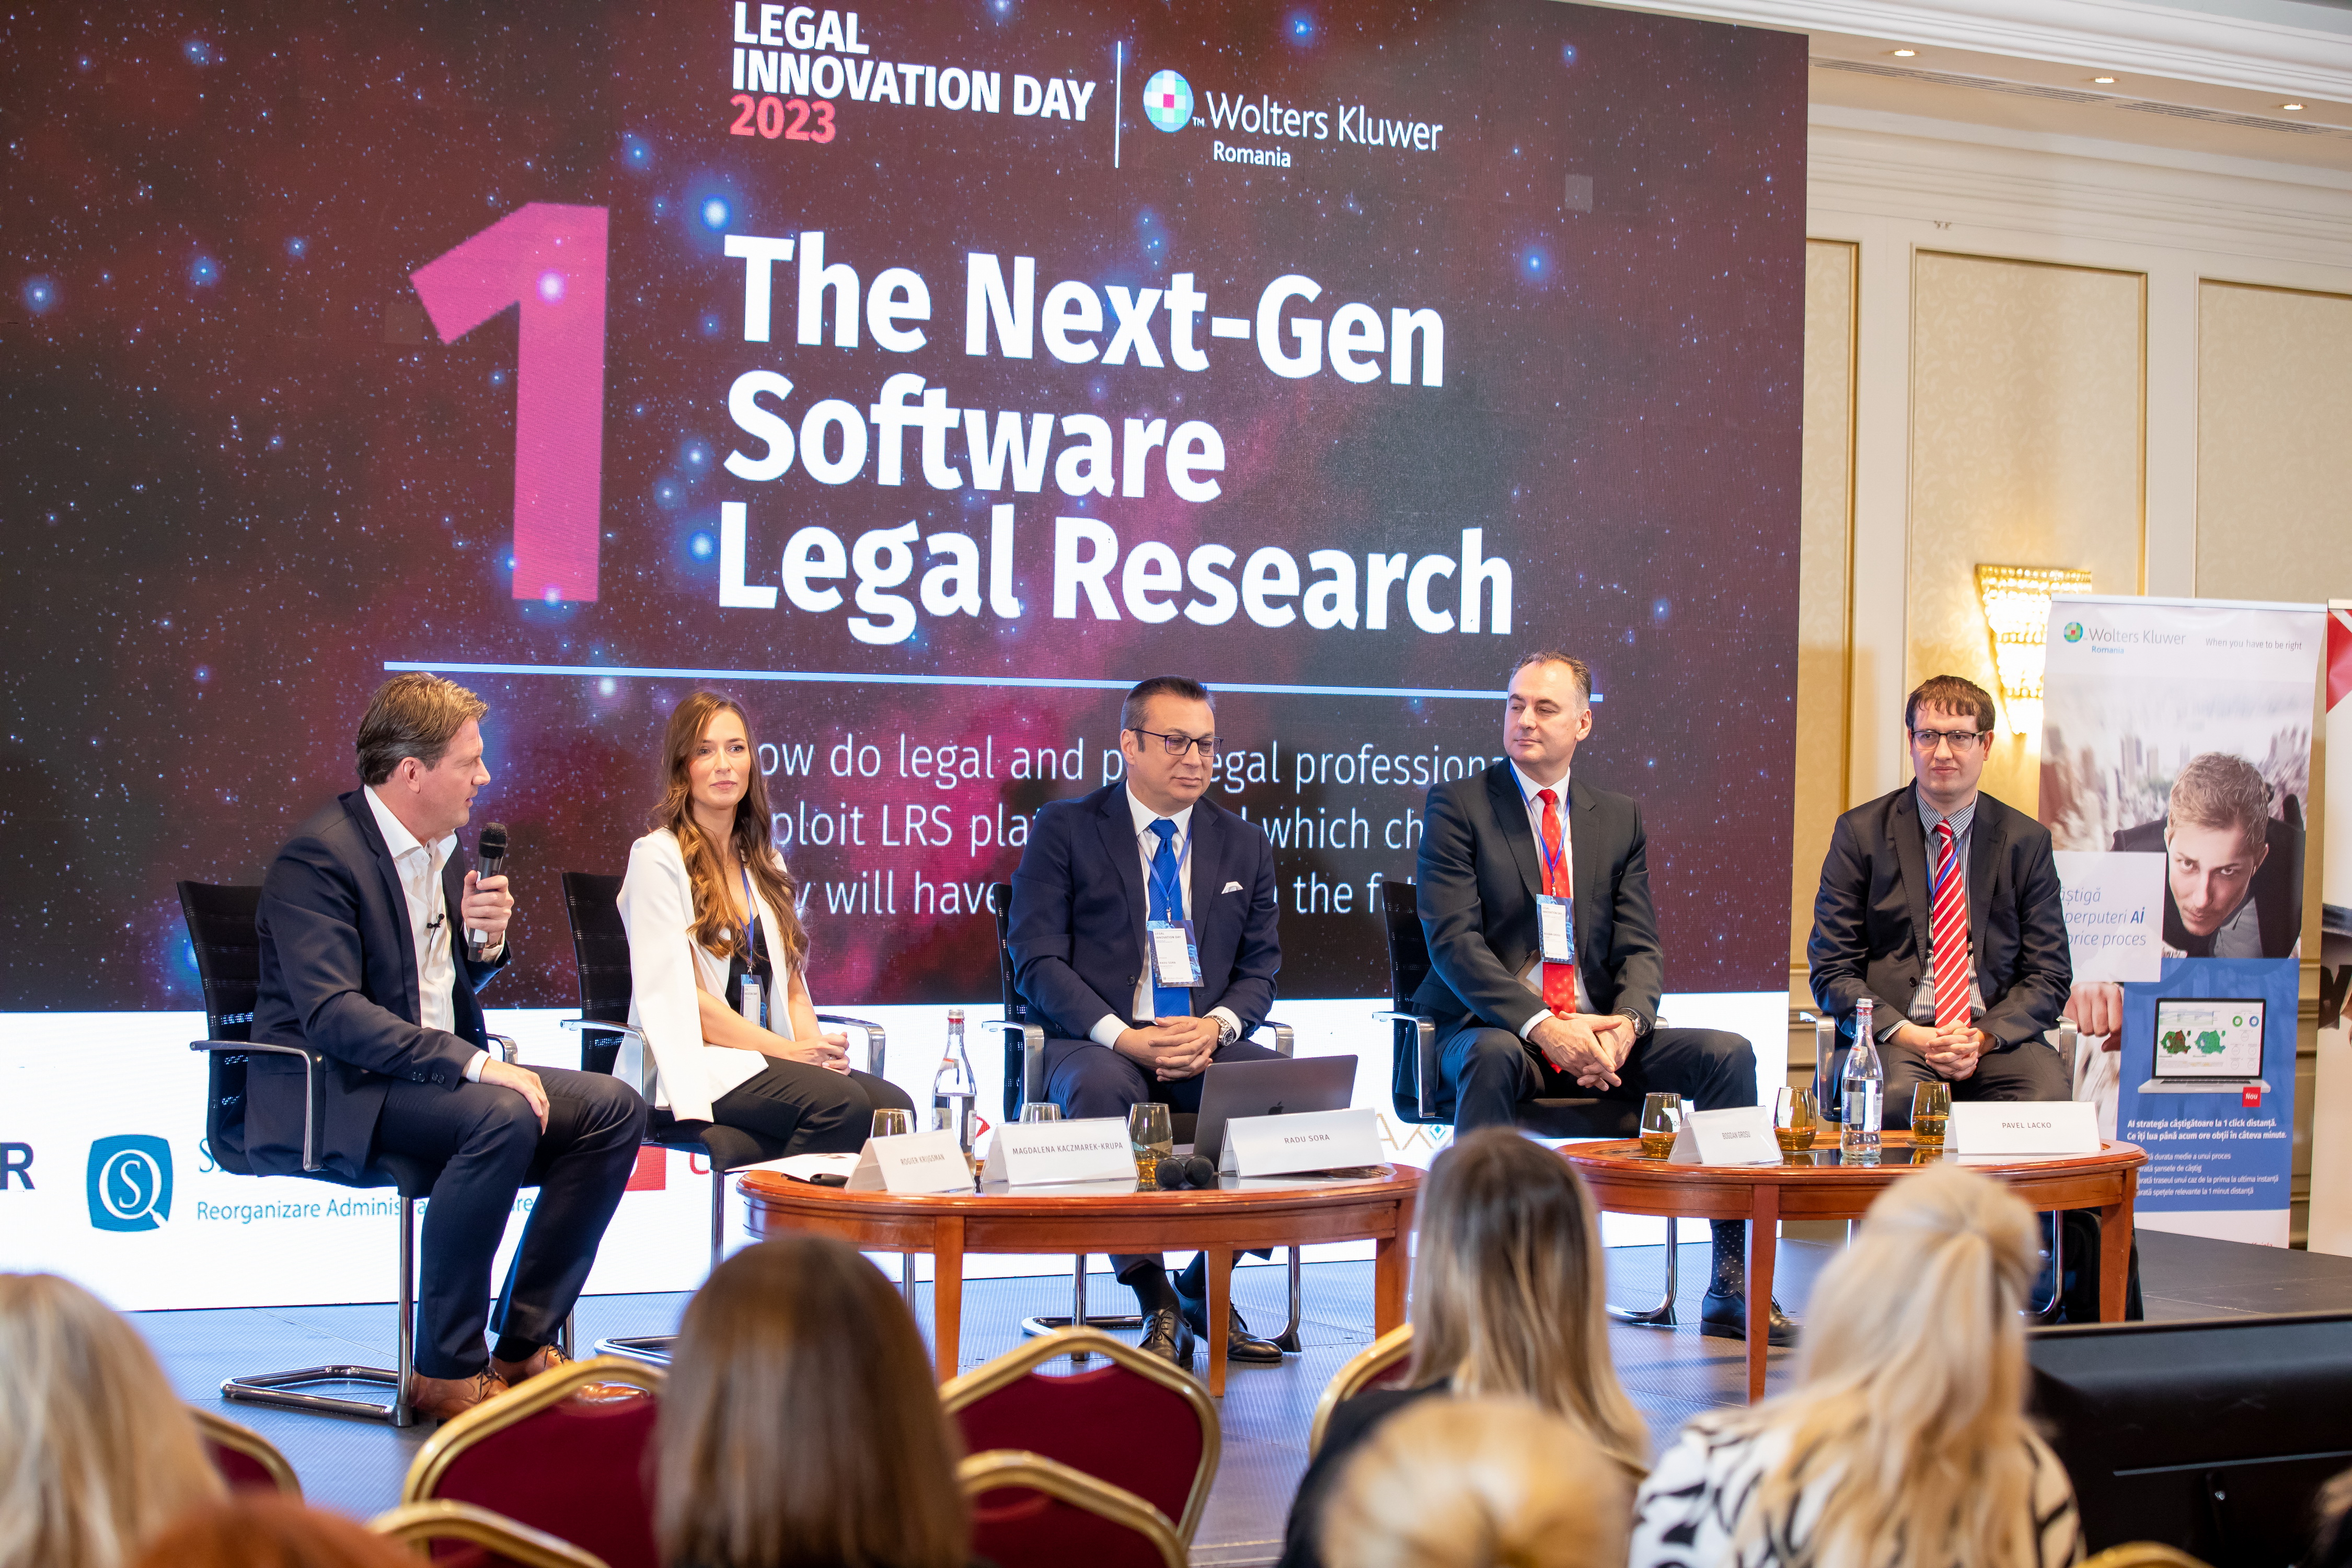 Legal Innovation Day 2023 - Conference - Wolters Kluwer Romania